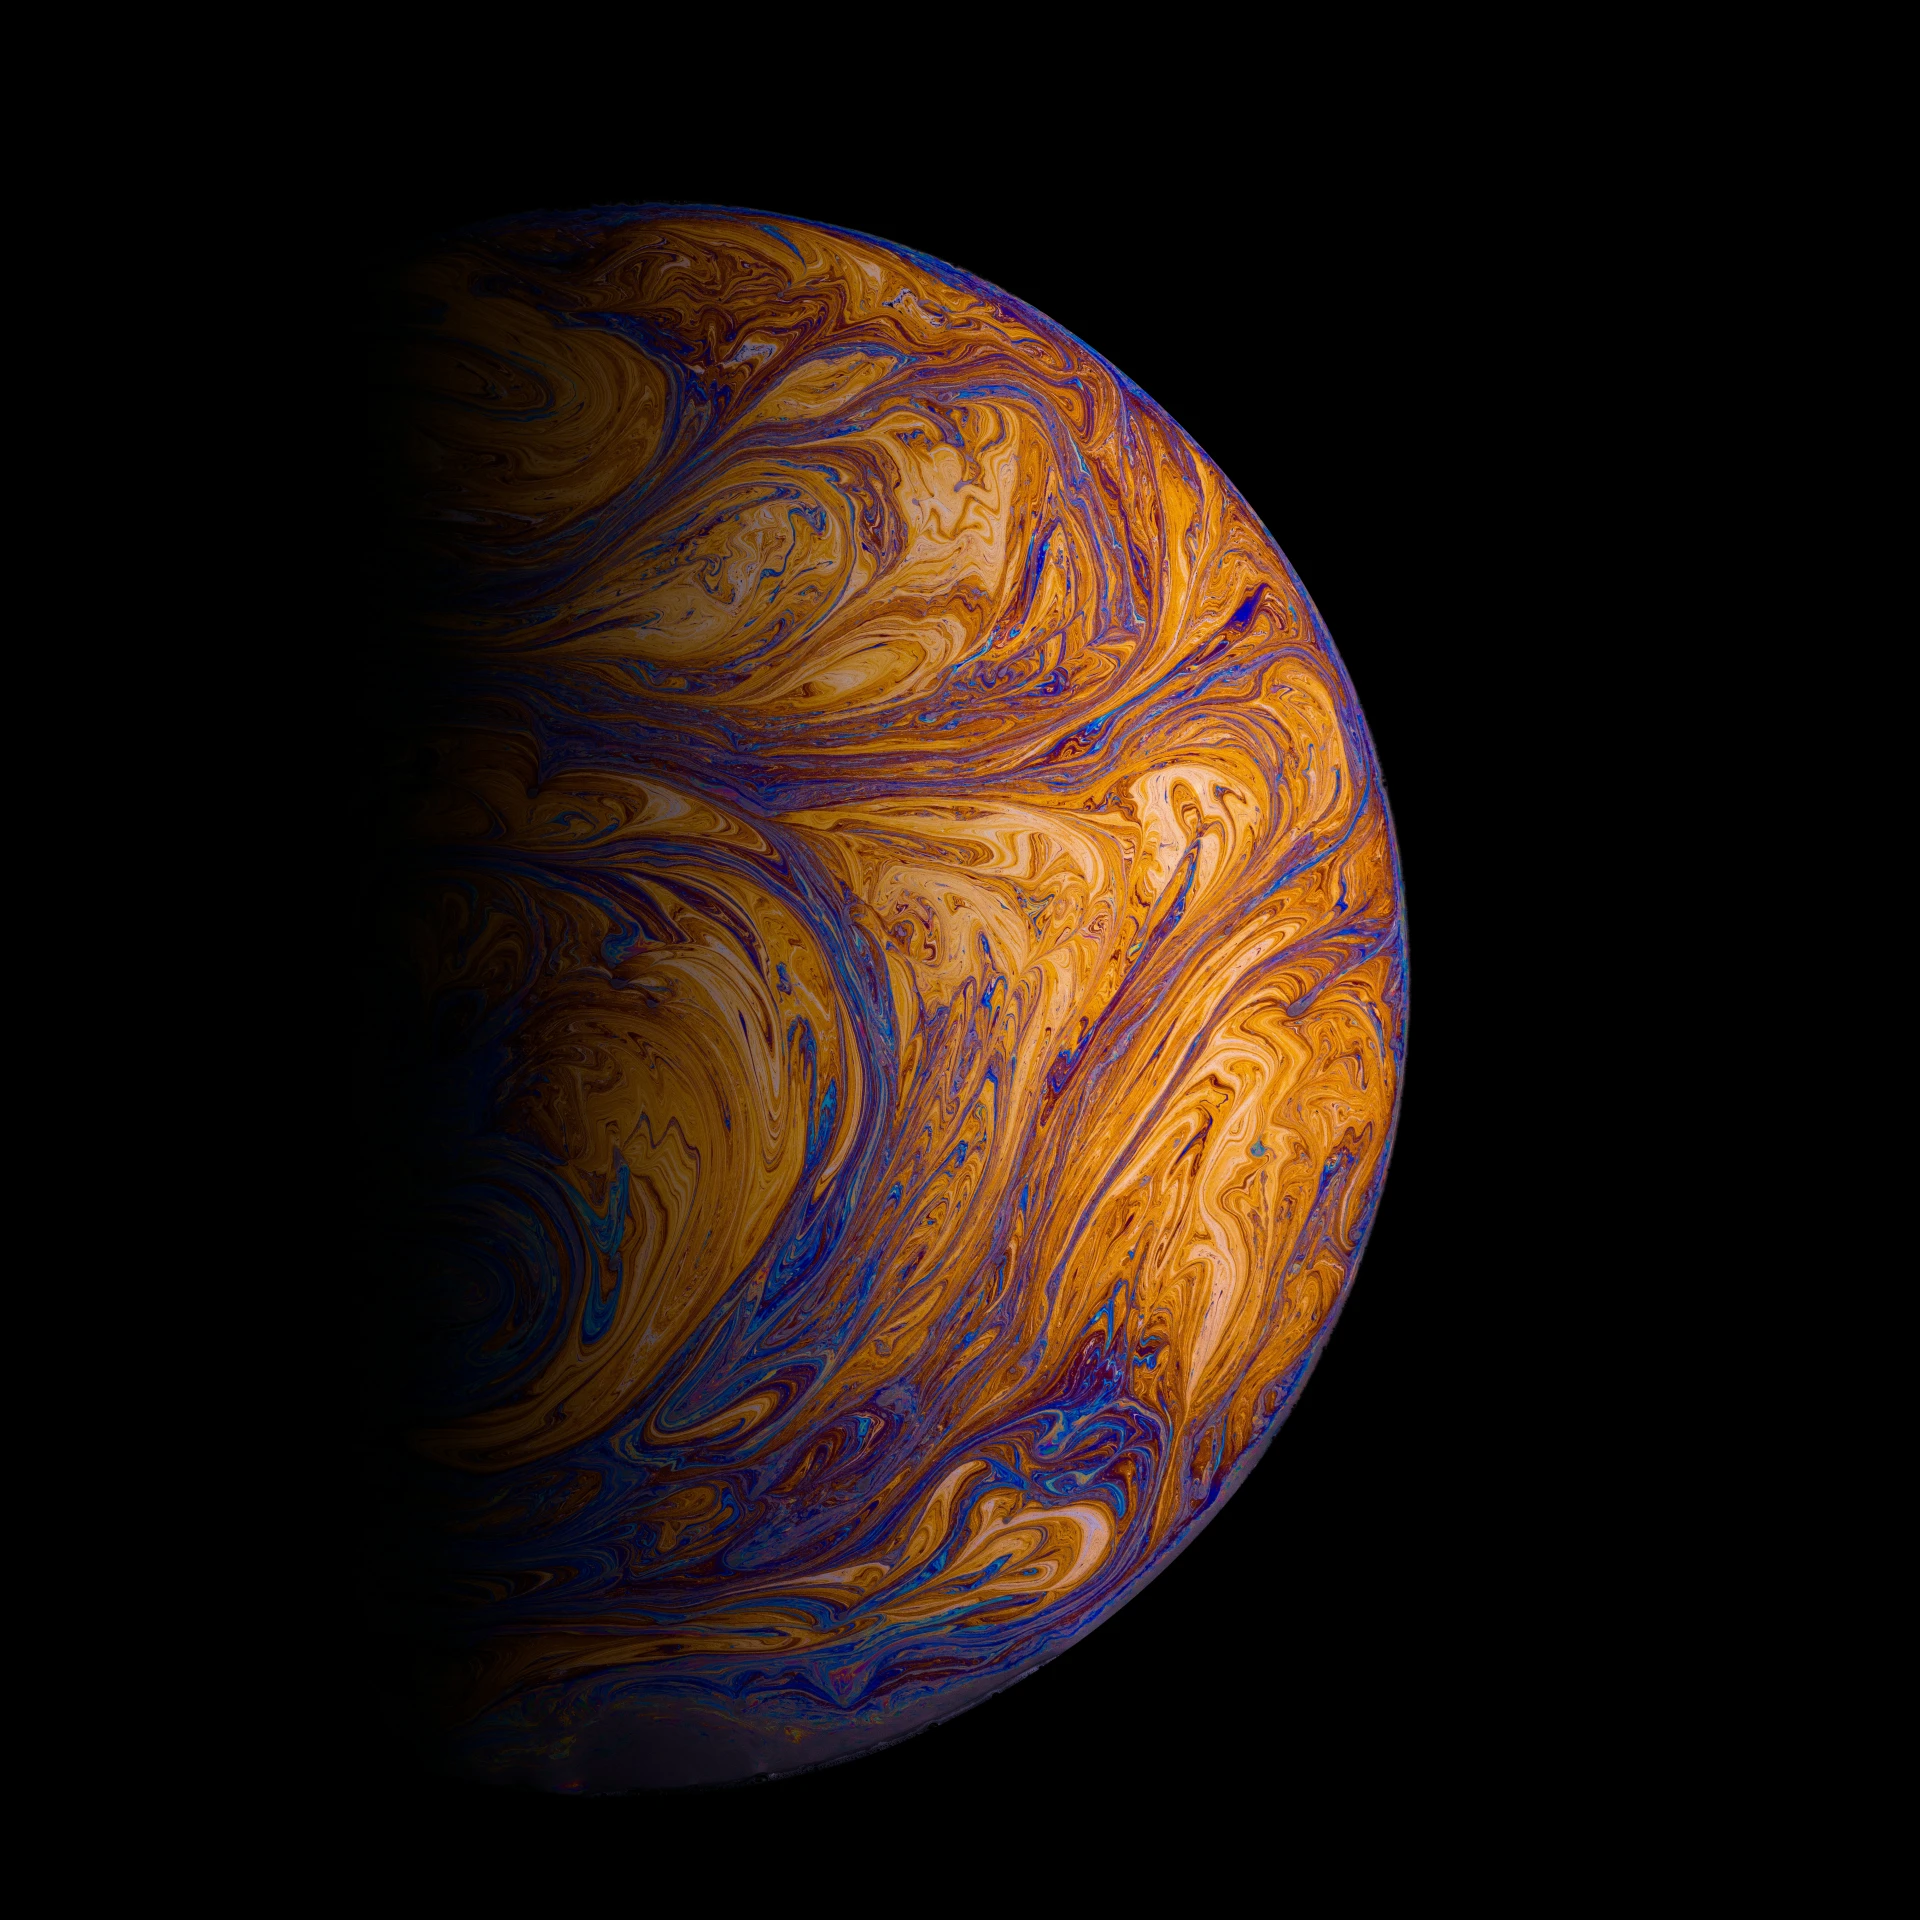 the planet is shown in the center of a dark background